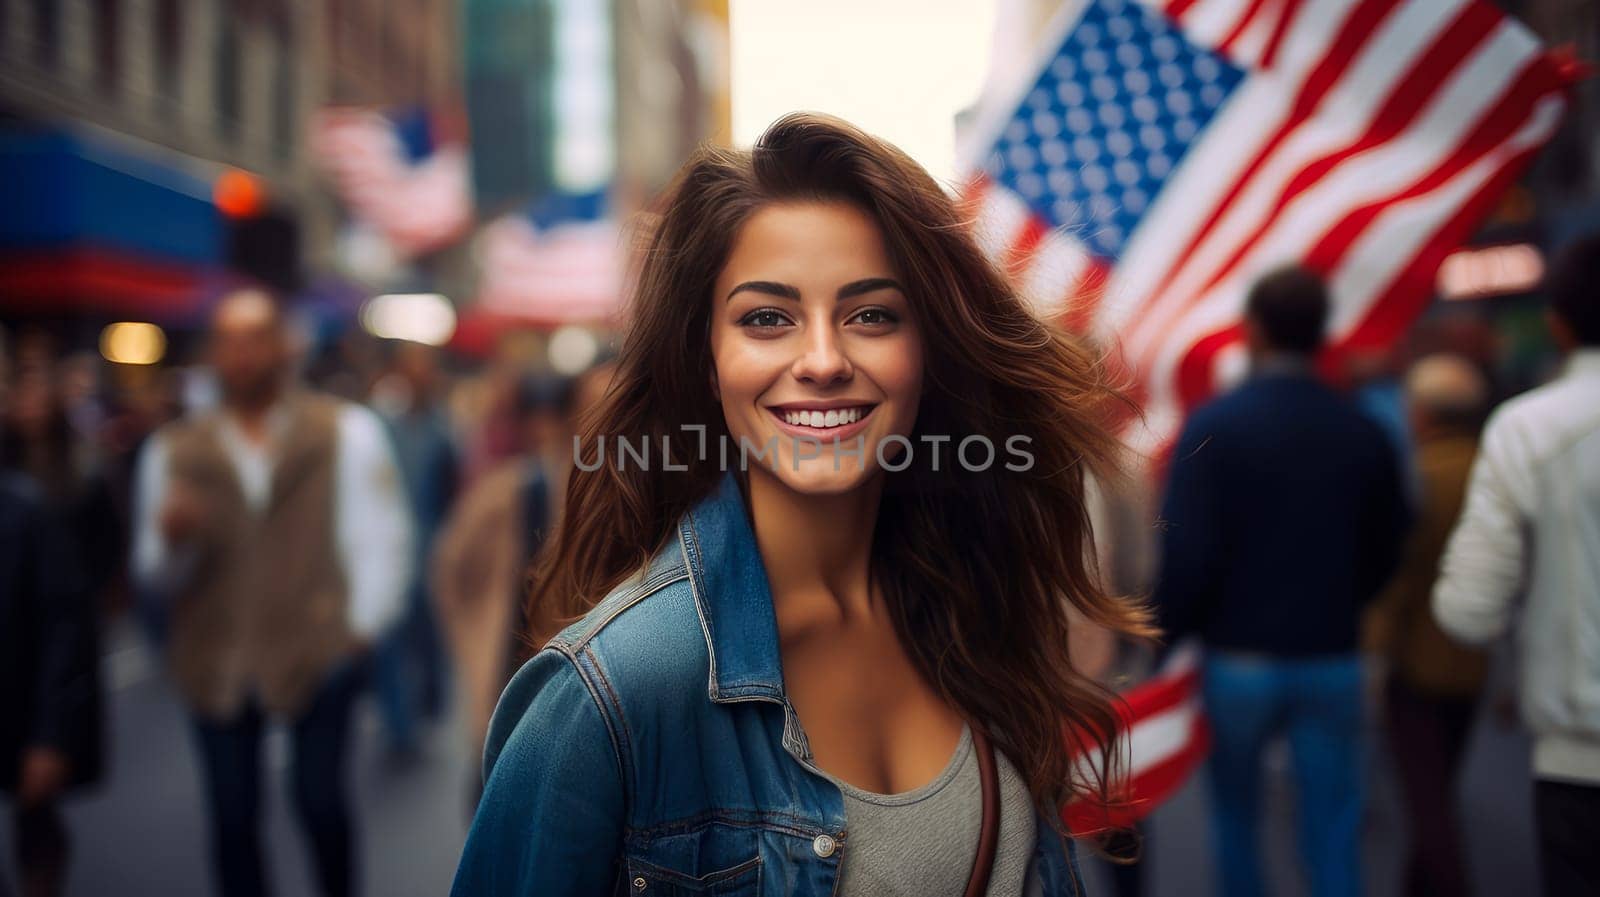 Happy, smiling woman with an American flag in city on Independence Day holidays of the United States of America. American President's Day, USA Independence Day, American flag colors background, 4 July, February holiday, stars and stripes red and blue